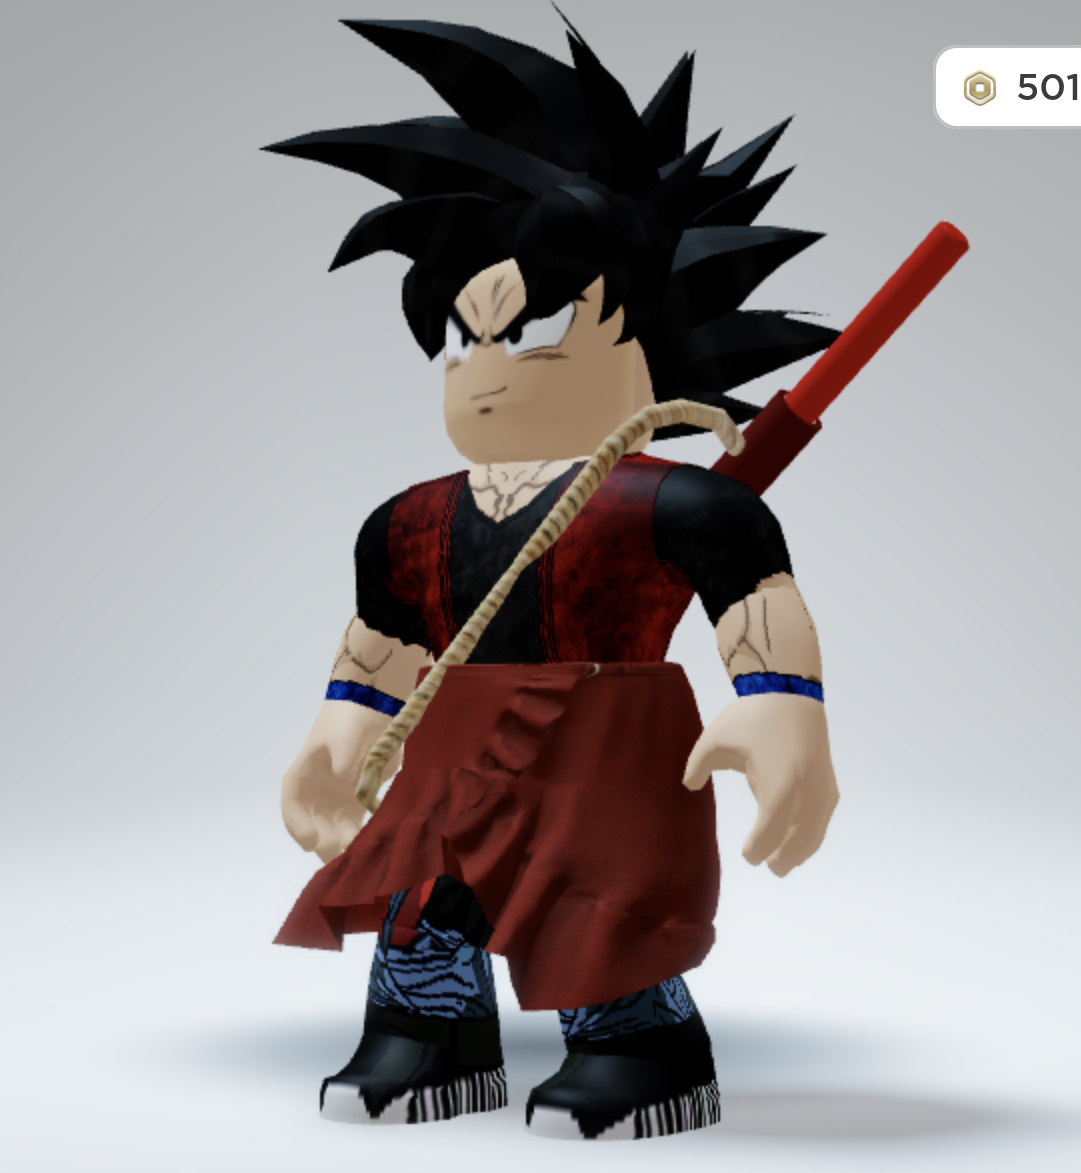 This is the closest I could get to making a Xeno Goku roblox | Fandom